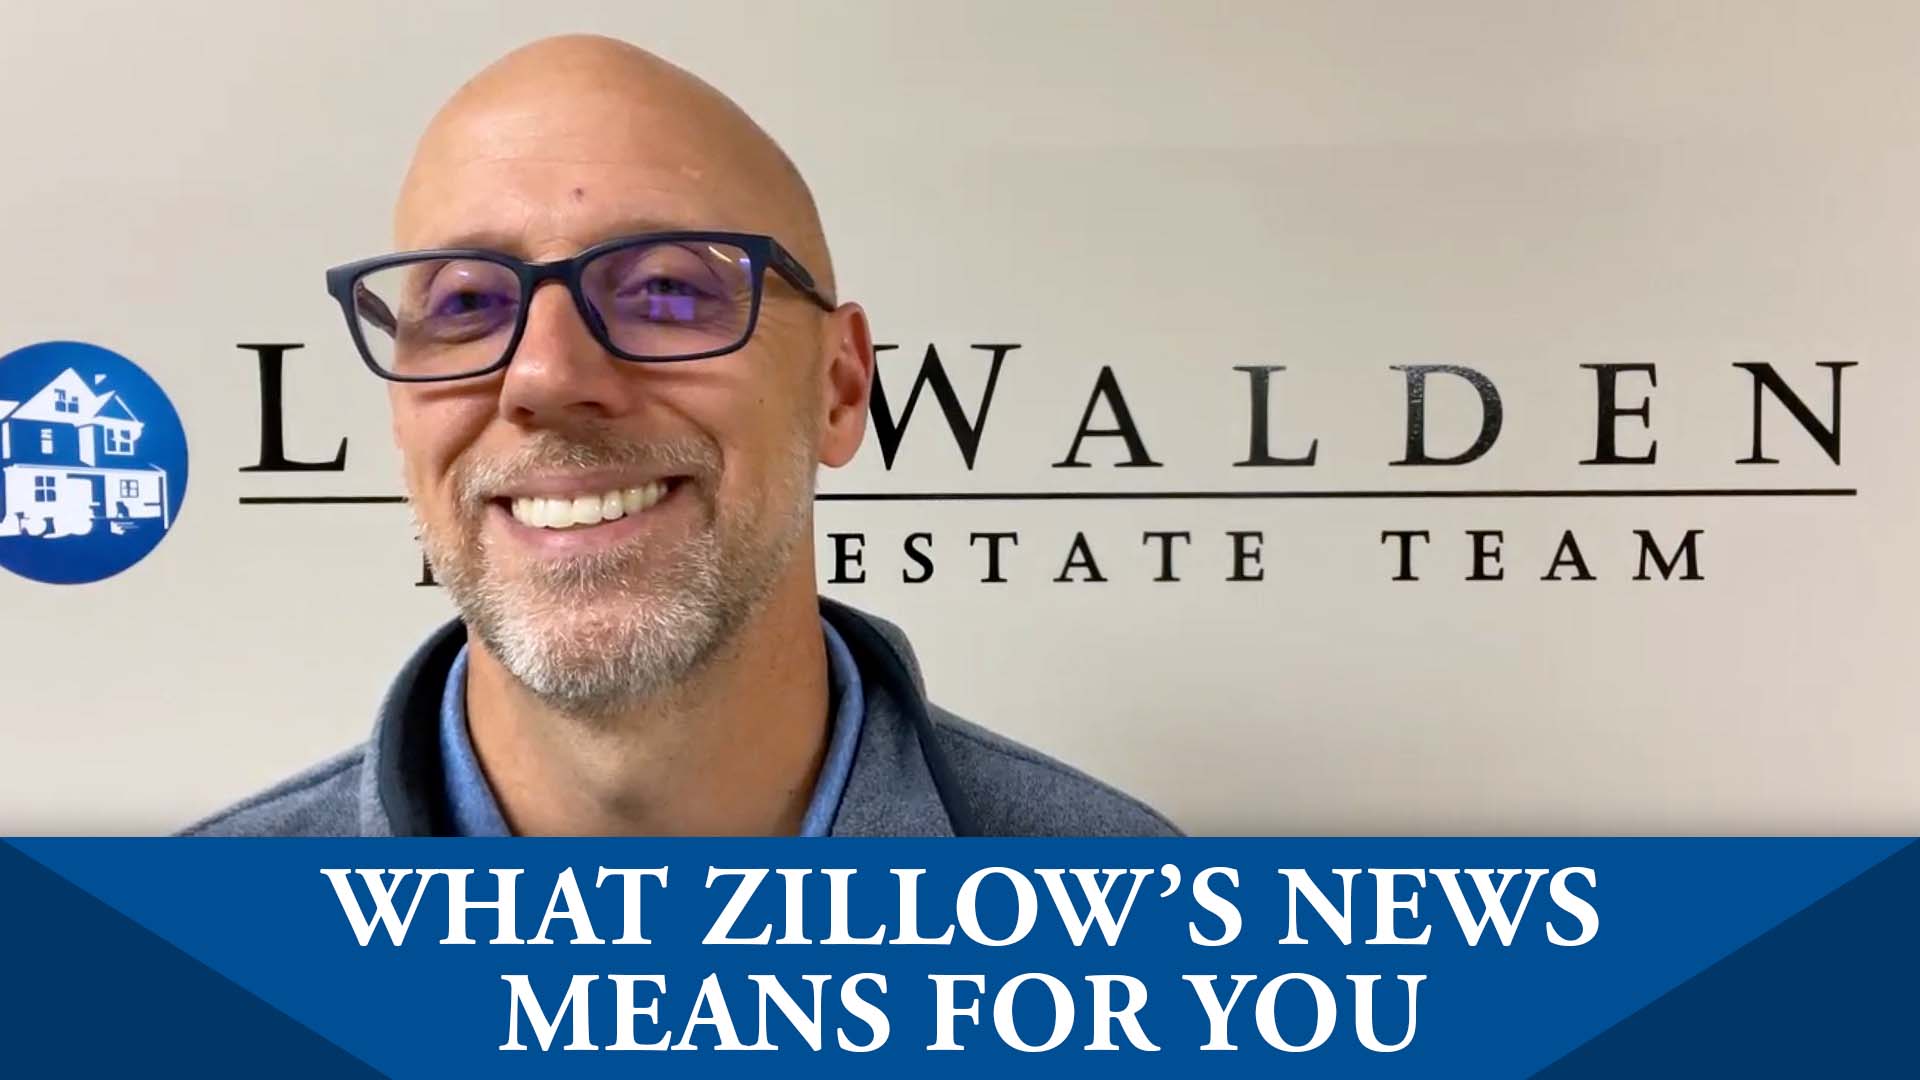 Why Zillow Dropped Their iBuyer Program